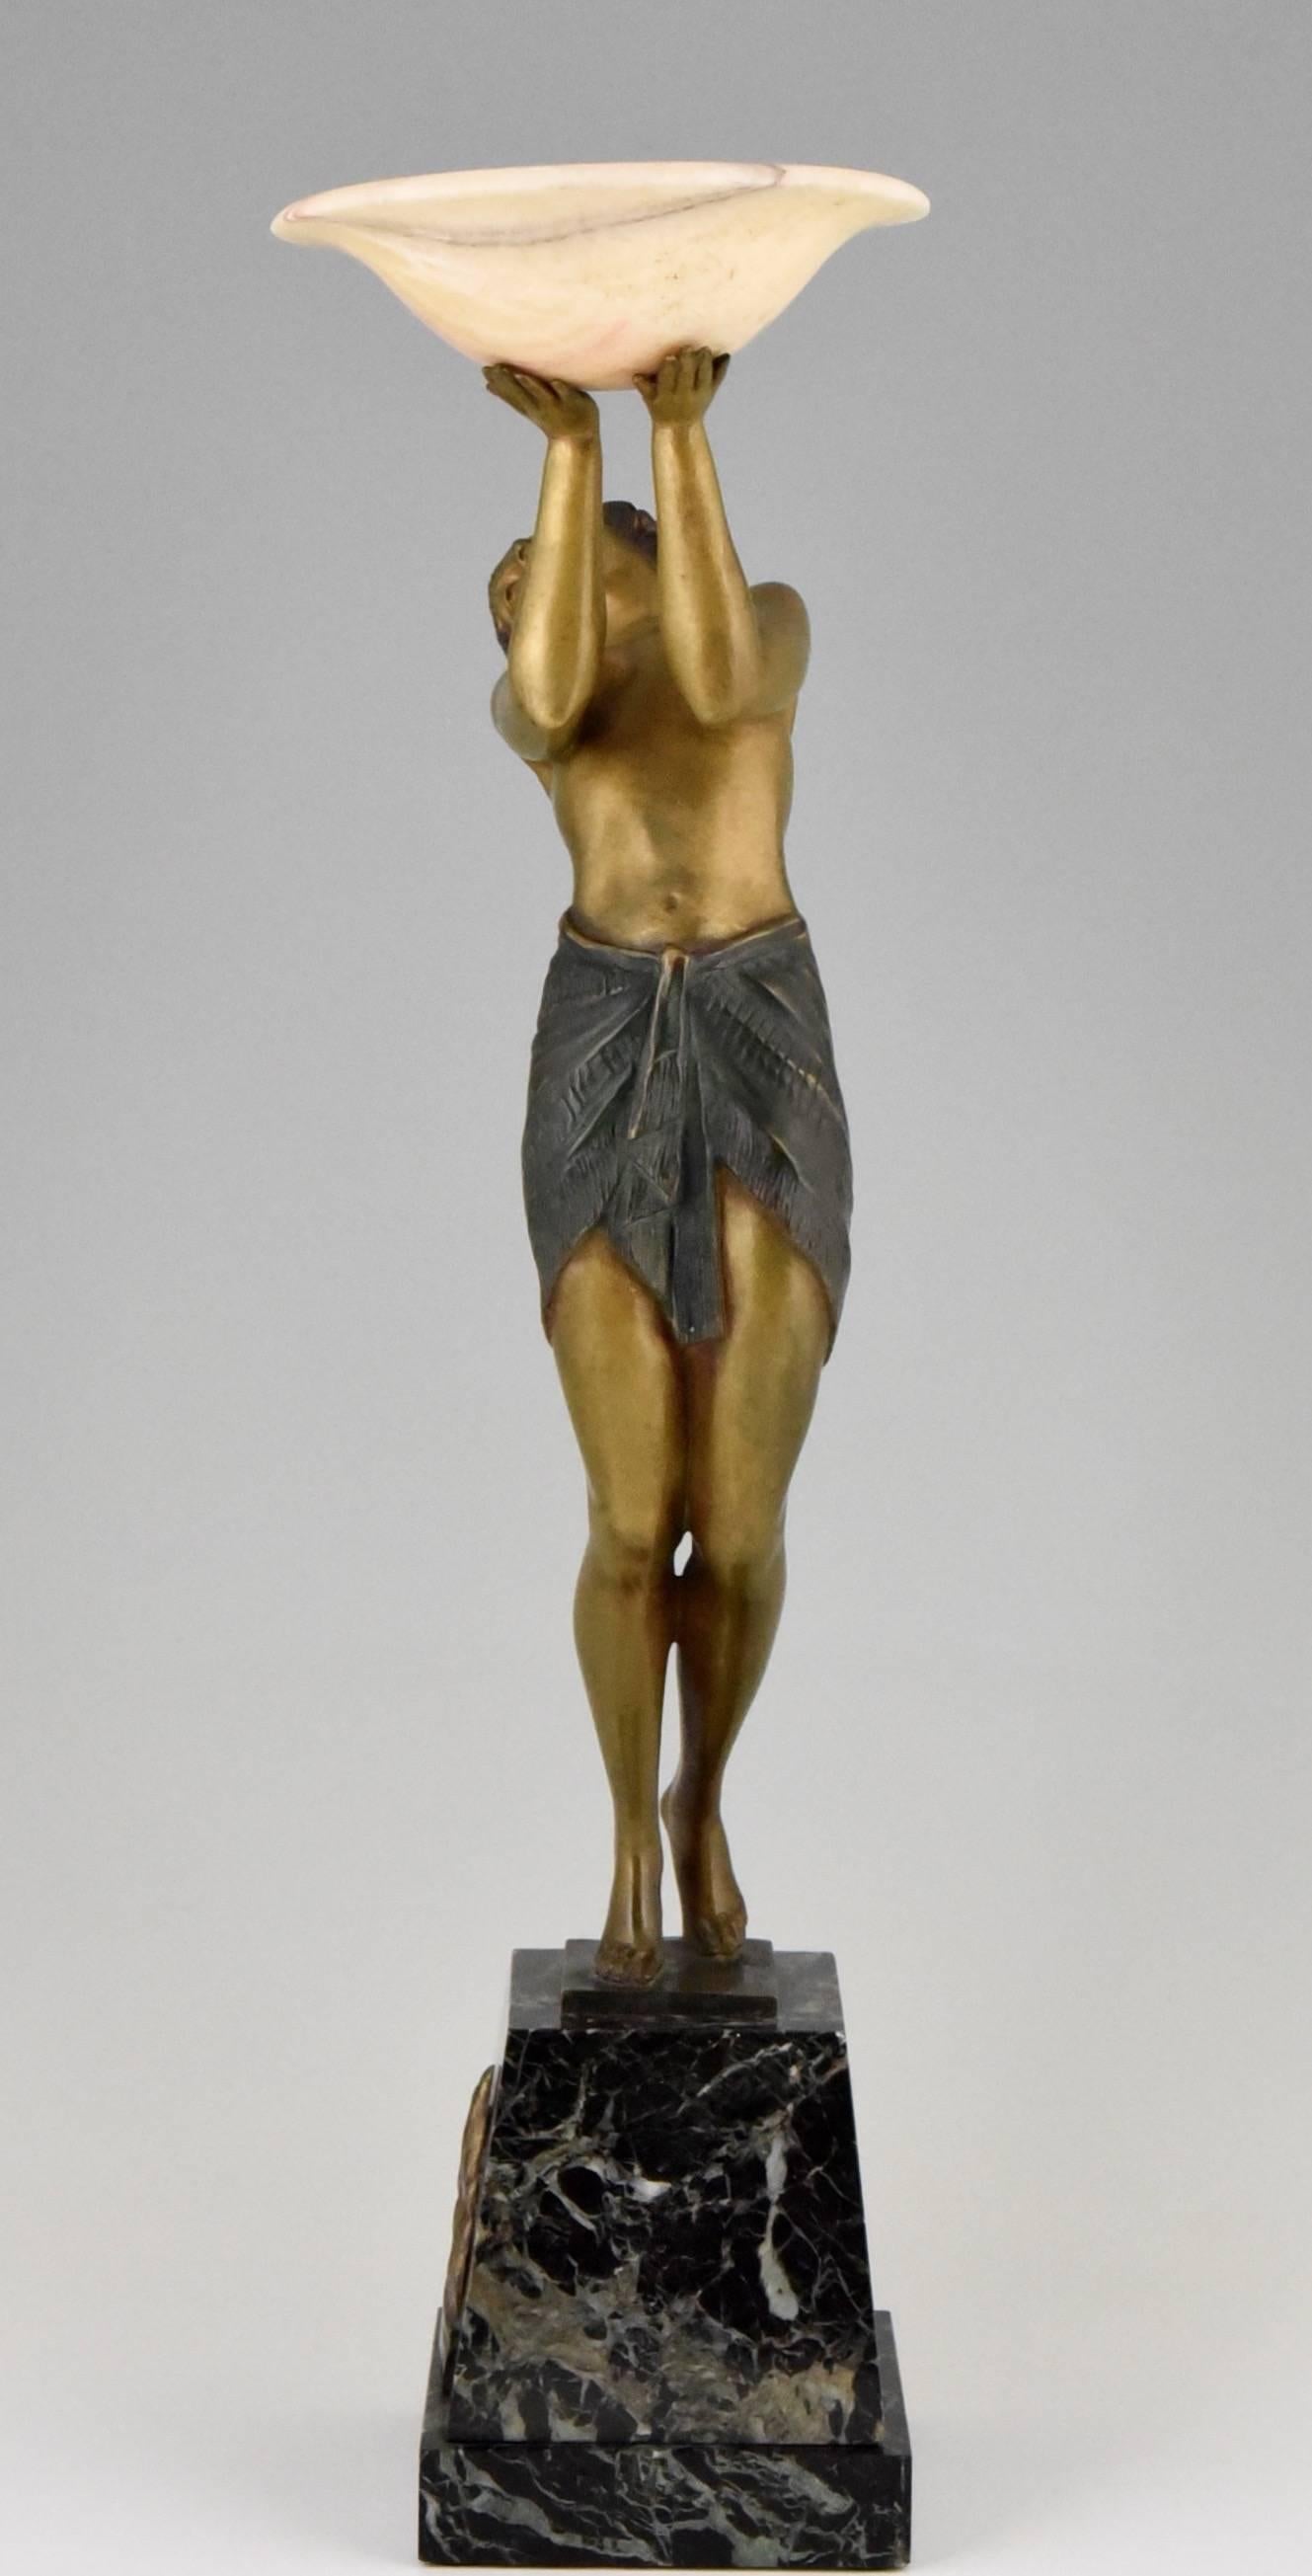 French Art Deco Bronze sculpture of a nude Holding a Tray by Pierre Laurel 1930 France